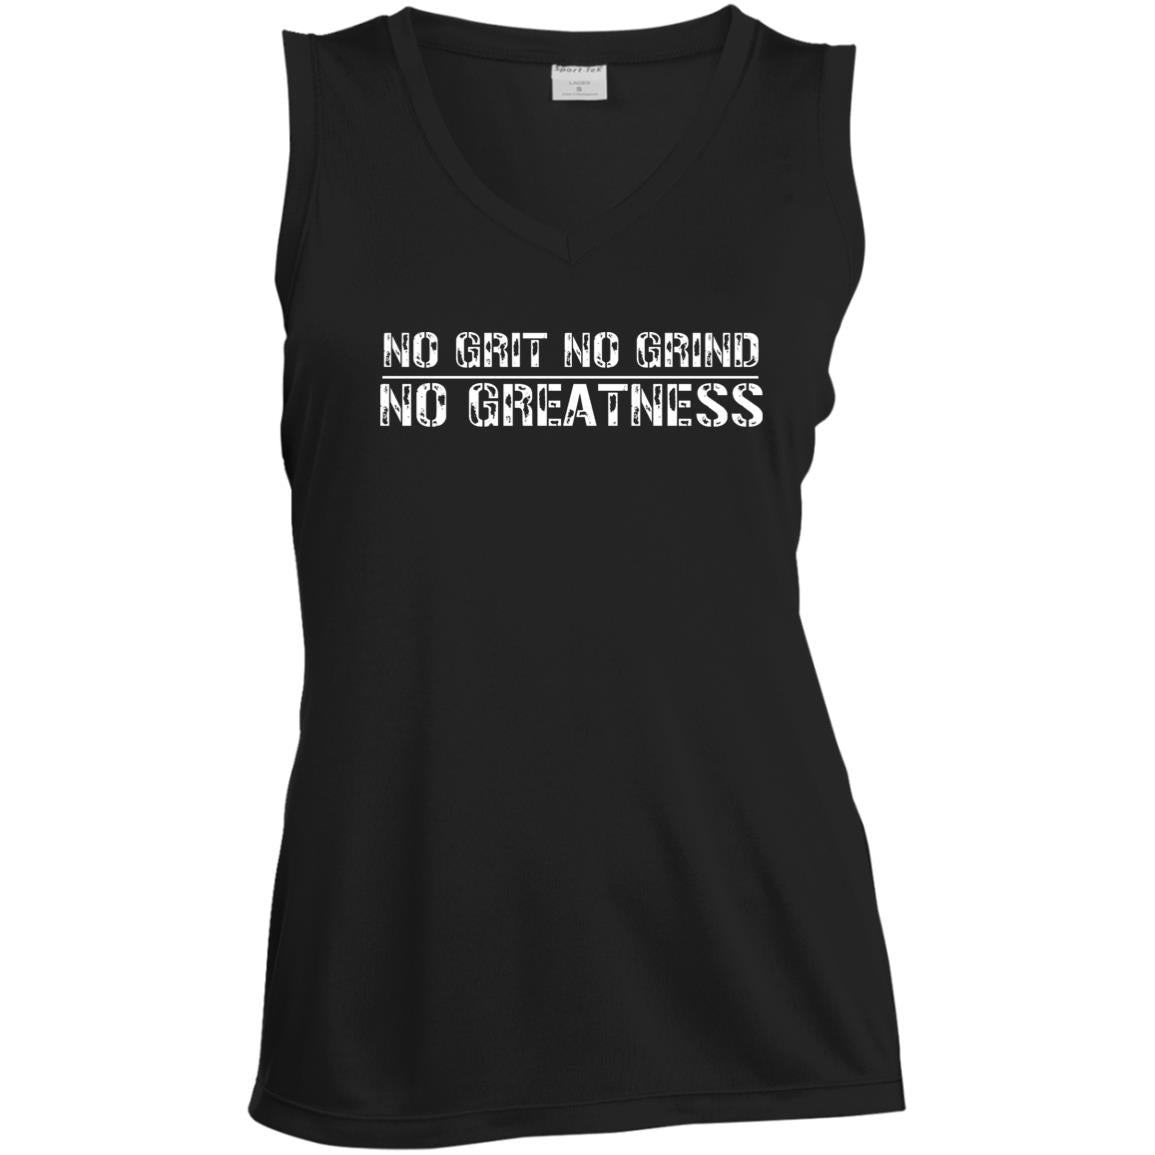 No Grit No Grind No Greatness 1 V-Neck Performance Tee - women's